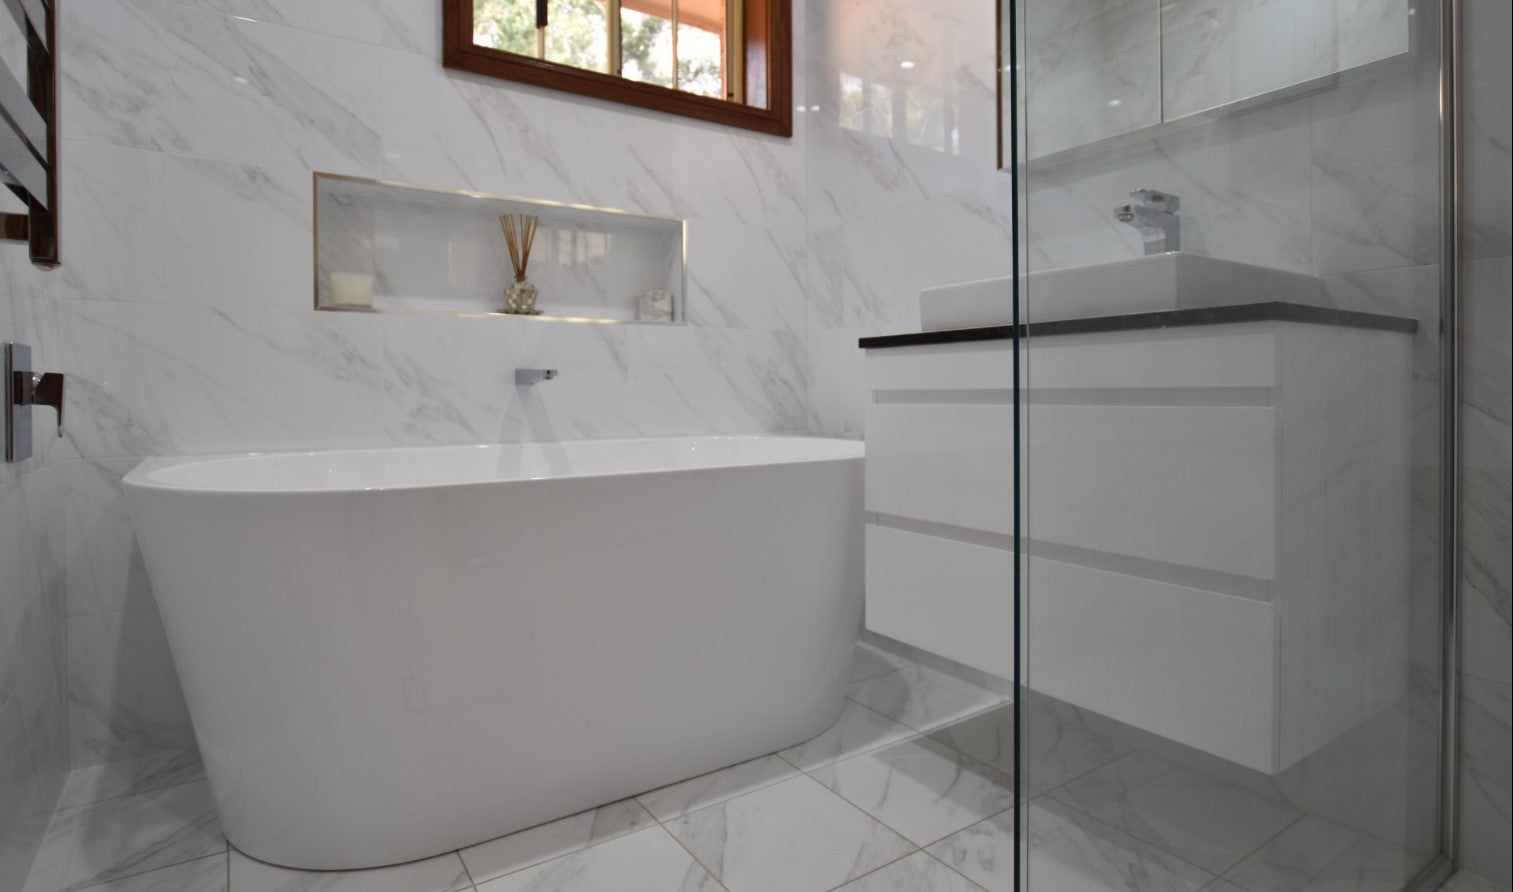 Deanne's bathroom features a back to wall bath tub, much easier to clean as there are less gaps